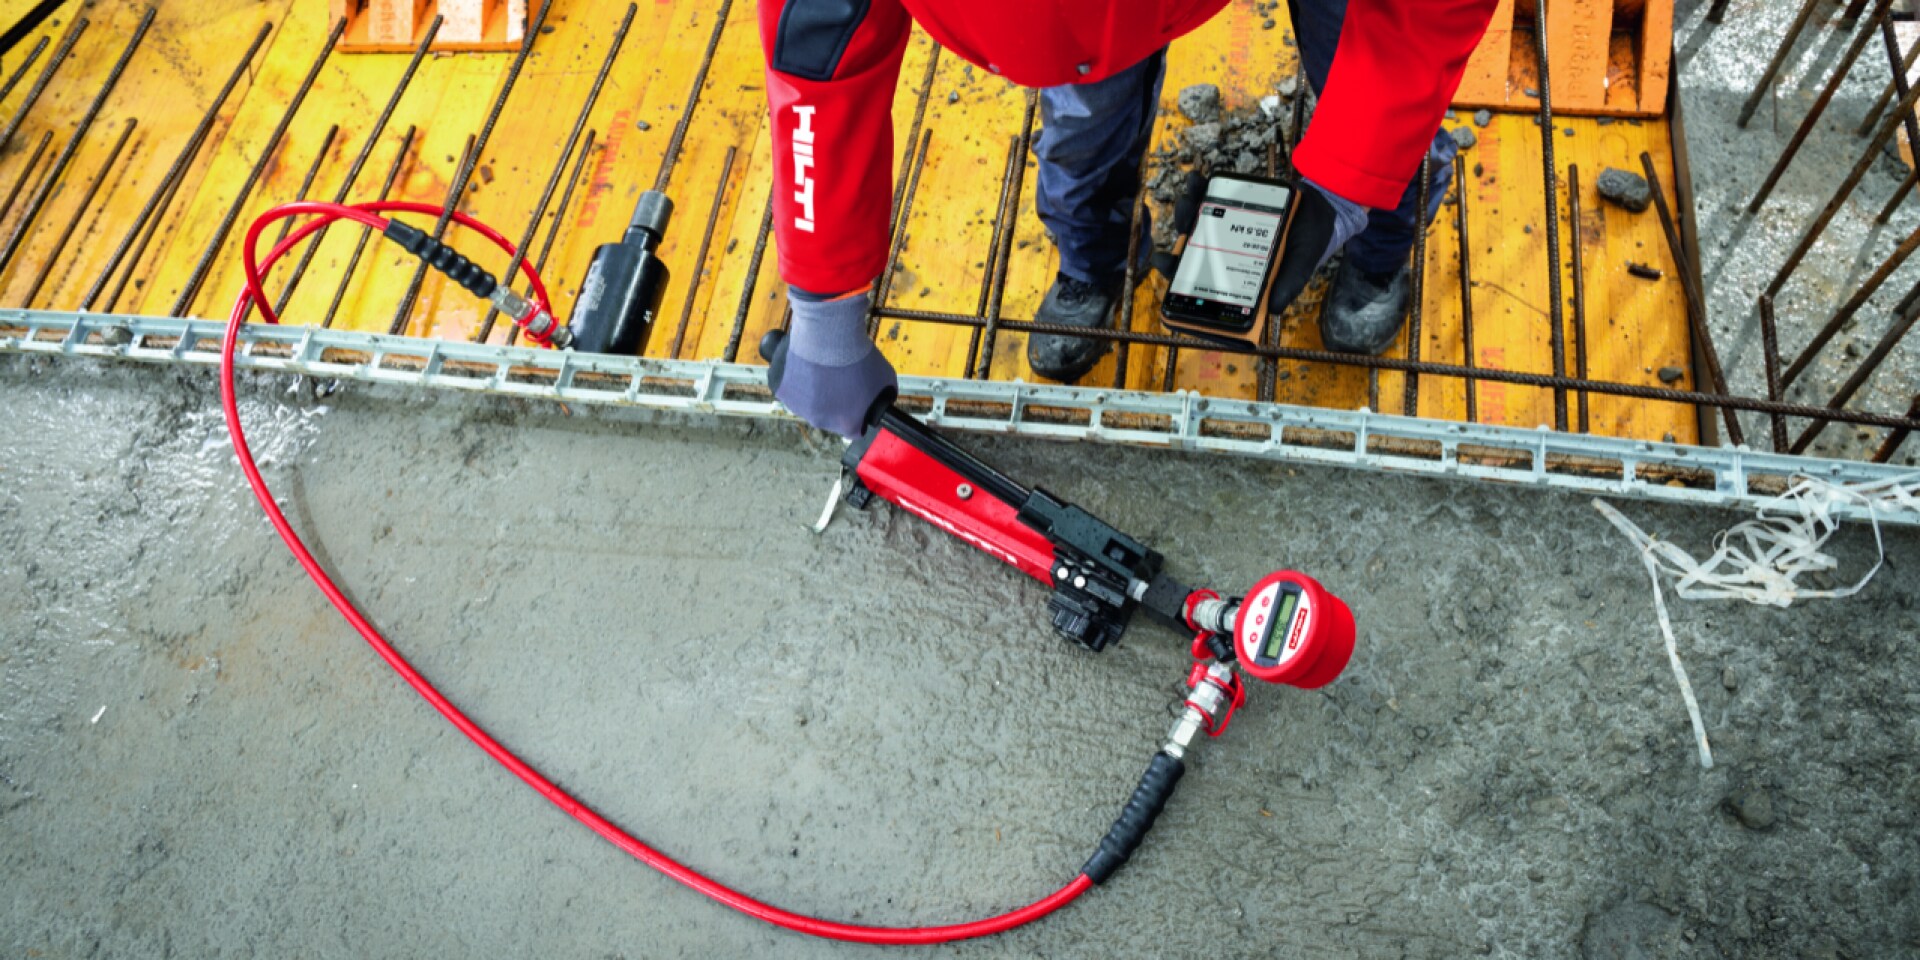 On-site anchor testing equipment with wireless data transfer to a smartphone being used in a concrete floor slab